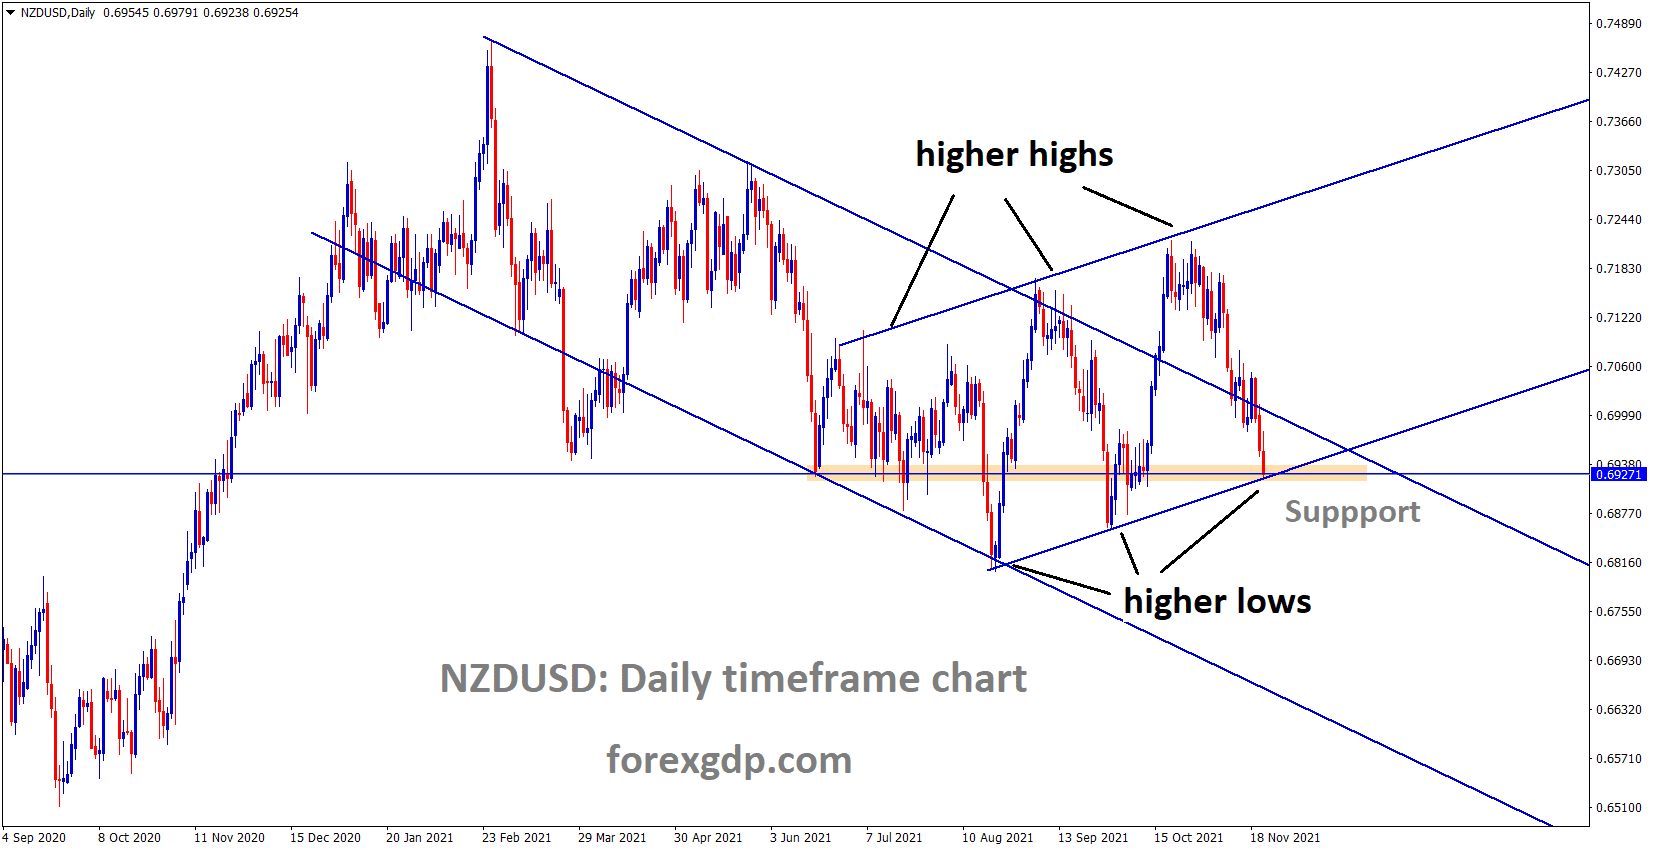 NZDUSD is moving in the Ascending channel and reached the higher low area